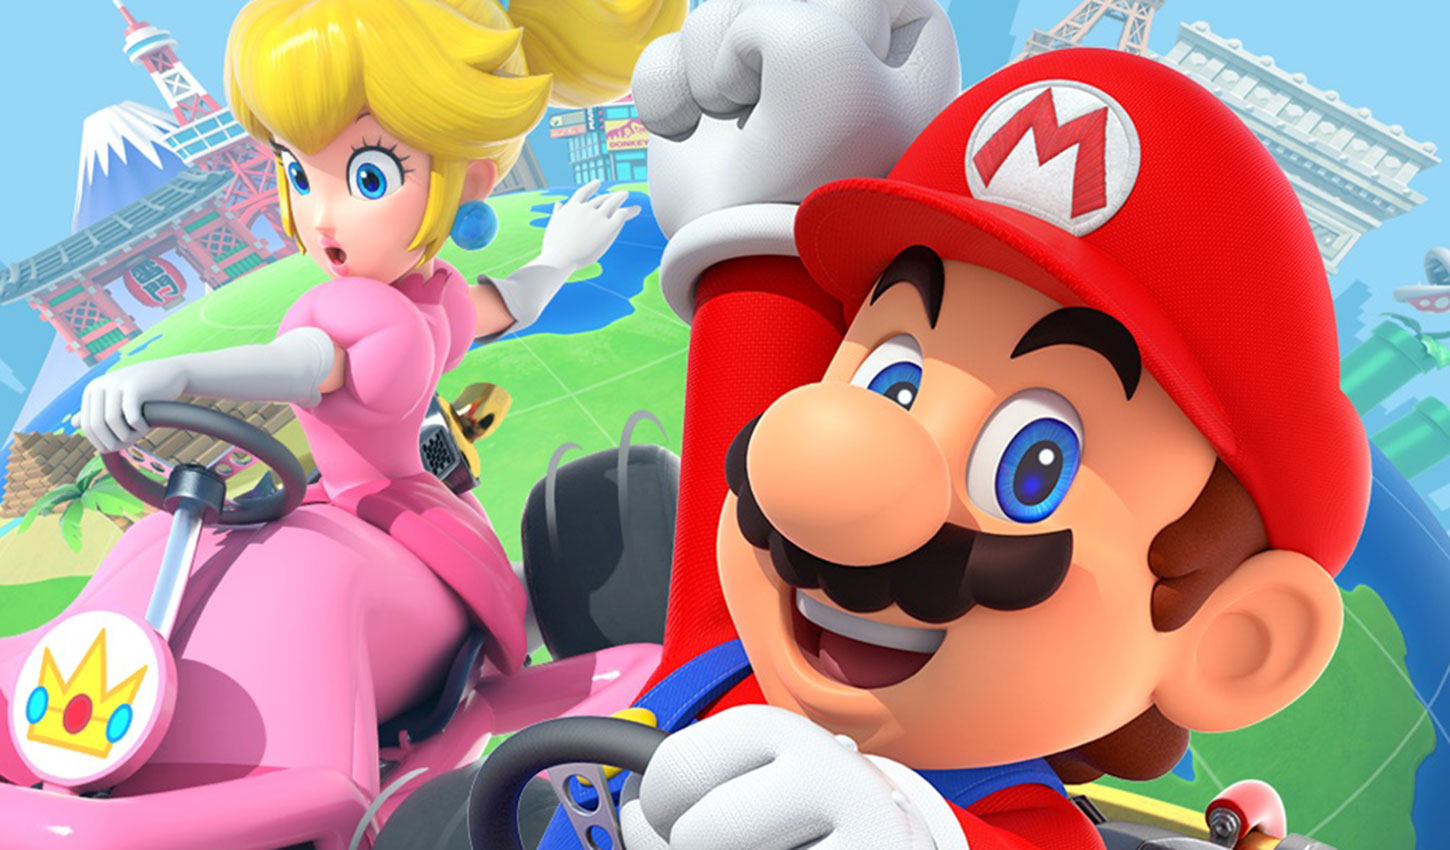 Nintendo Download: Experience State-of-the-Kart Technology